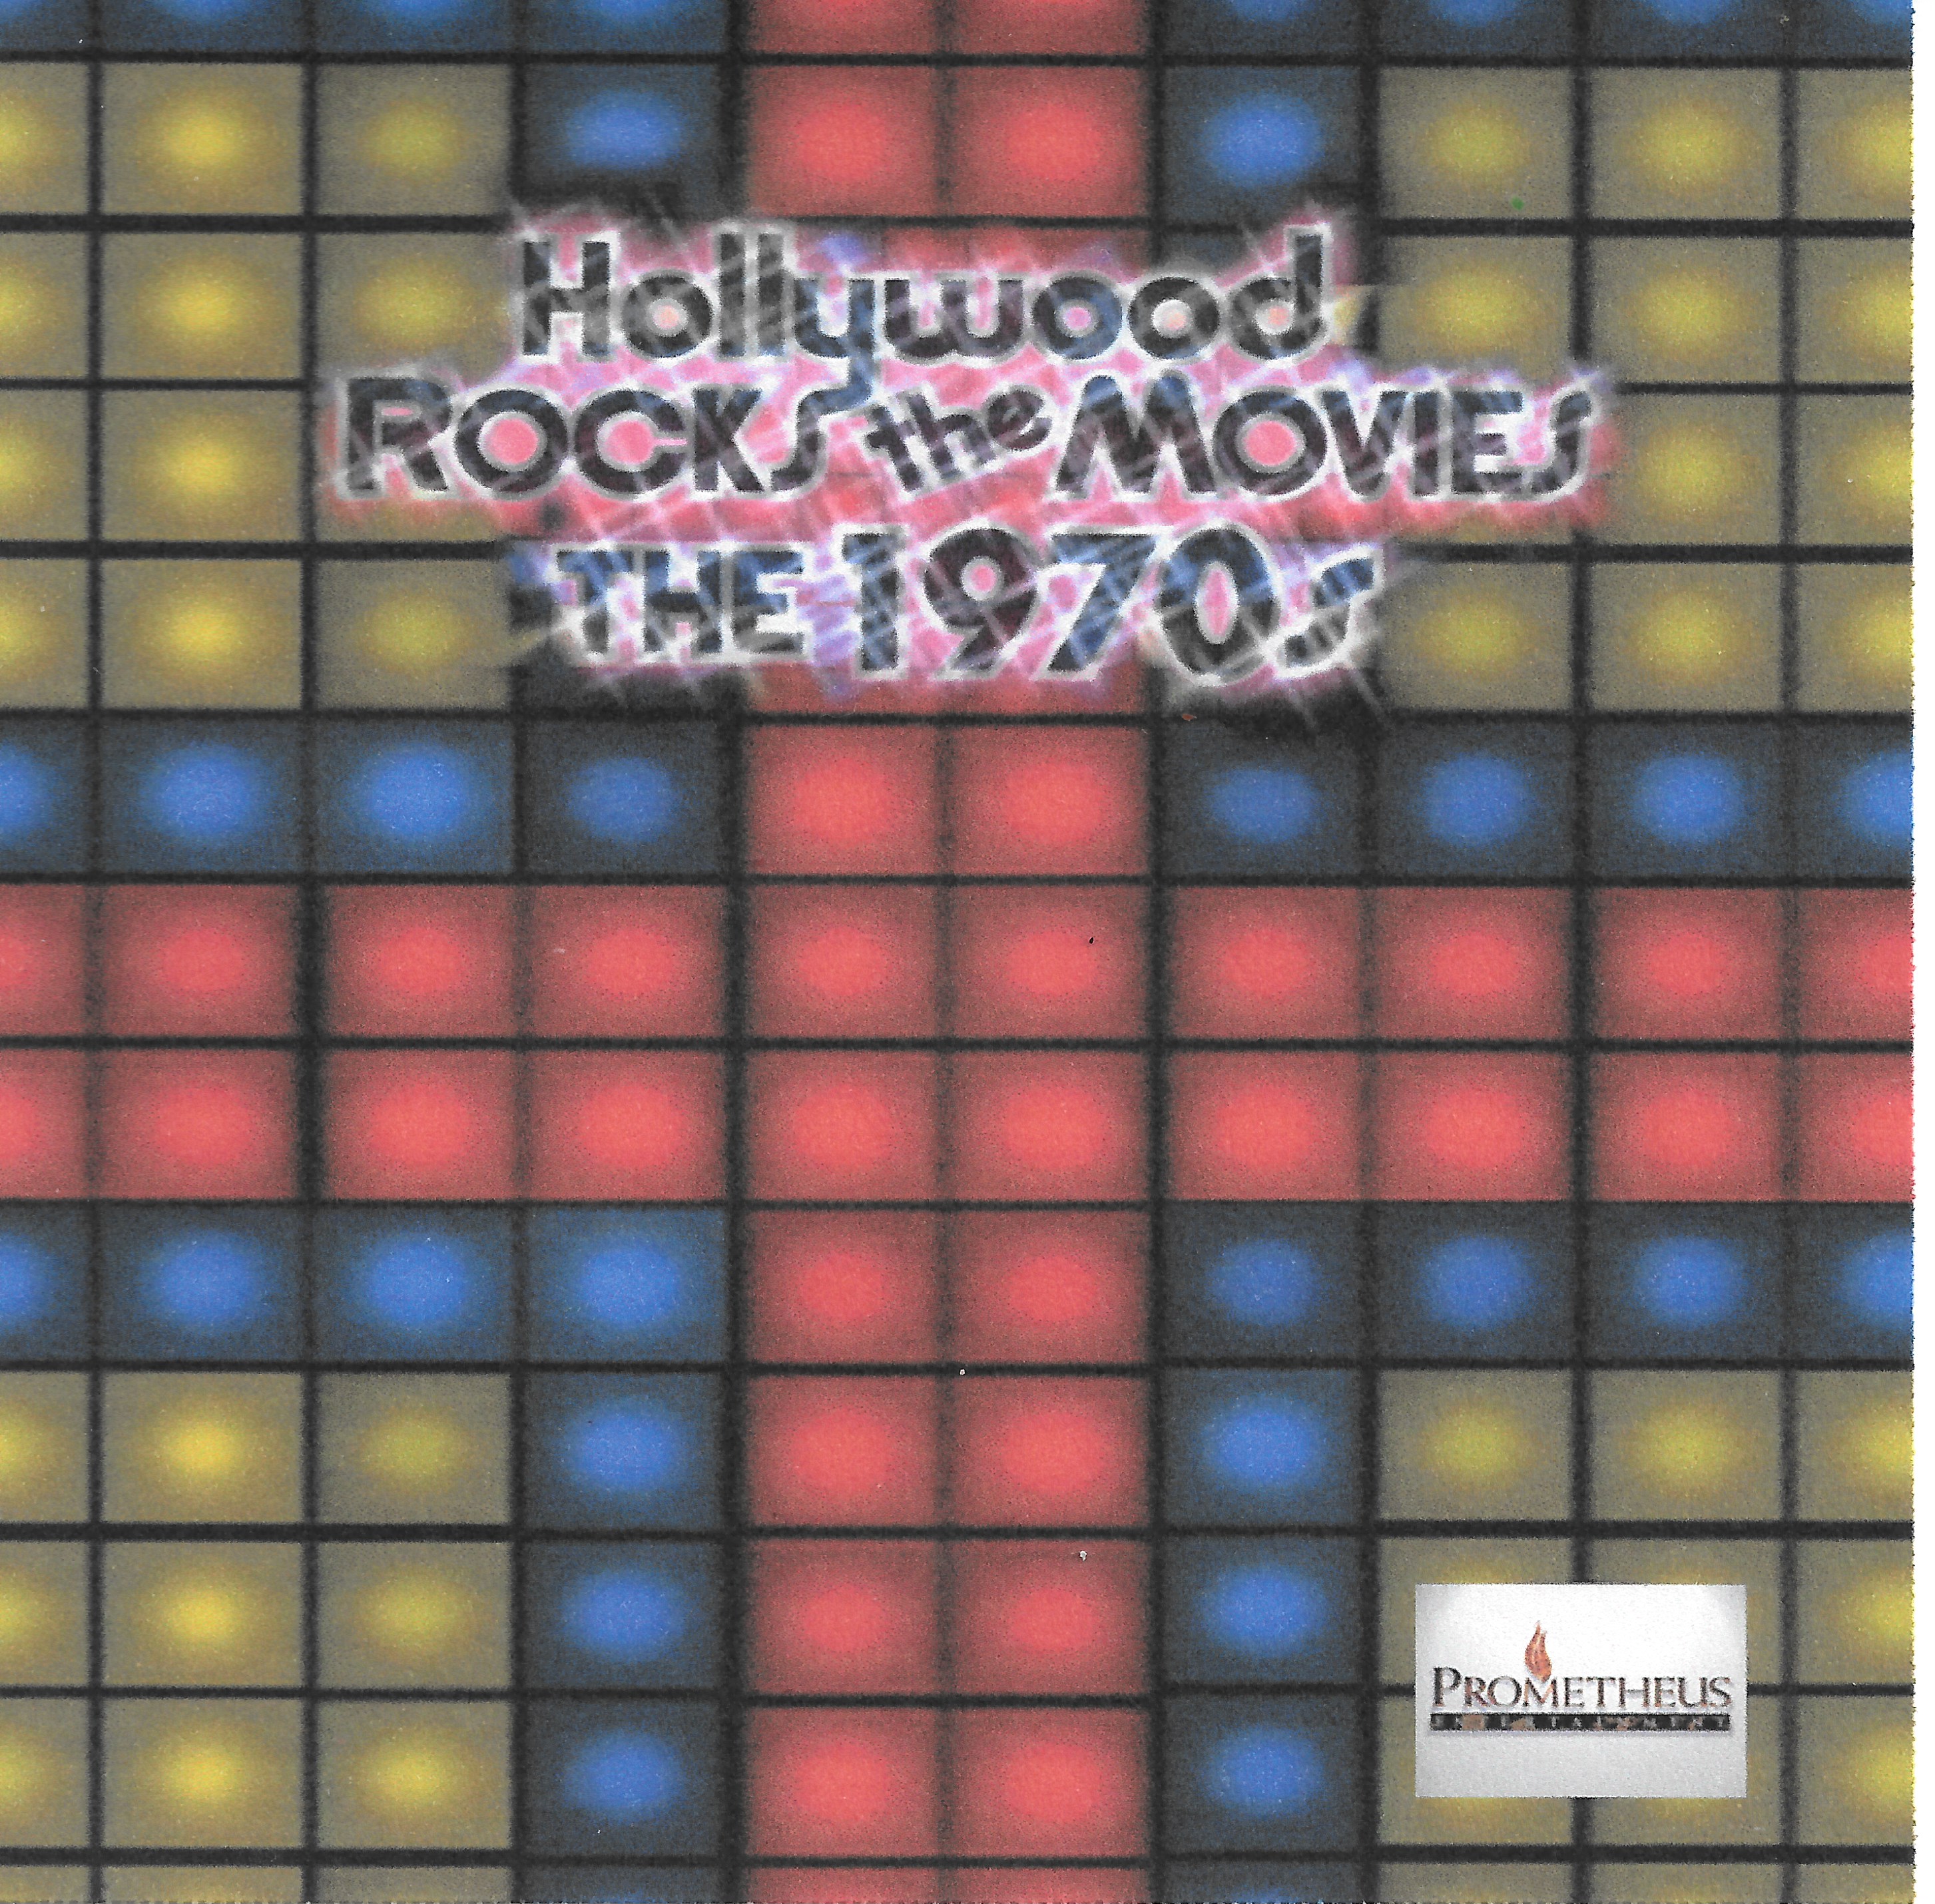 Hollywood Rocks the Movies: The 1970s (2002) starring David Bowie on DVD on DVD